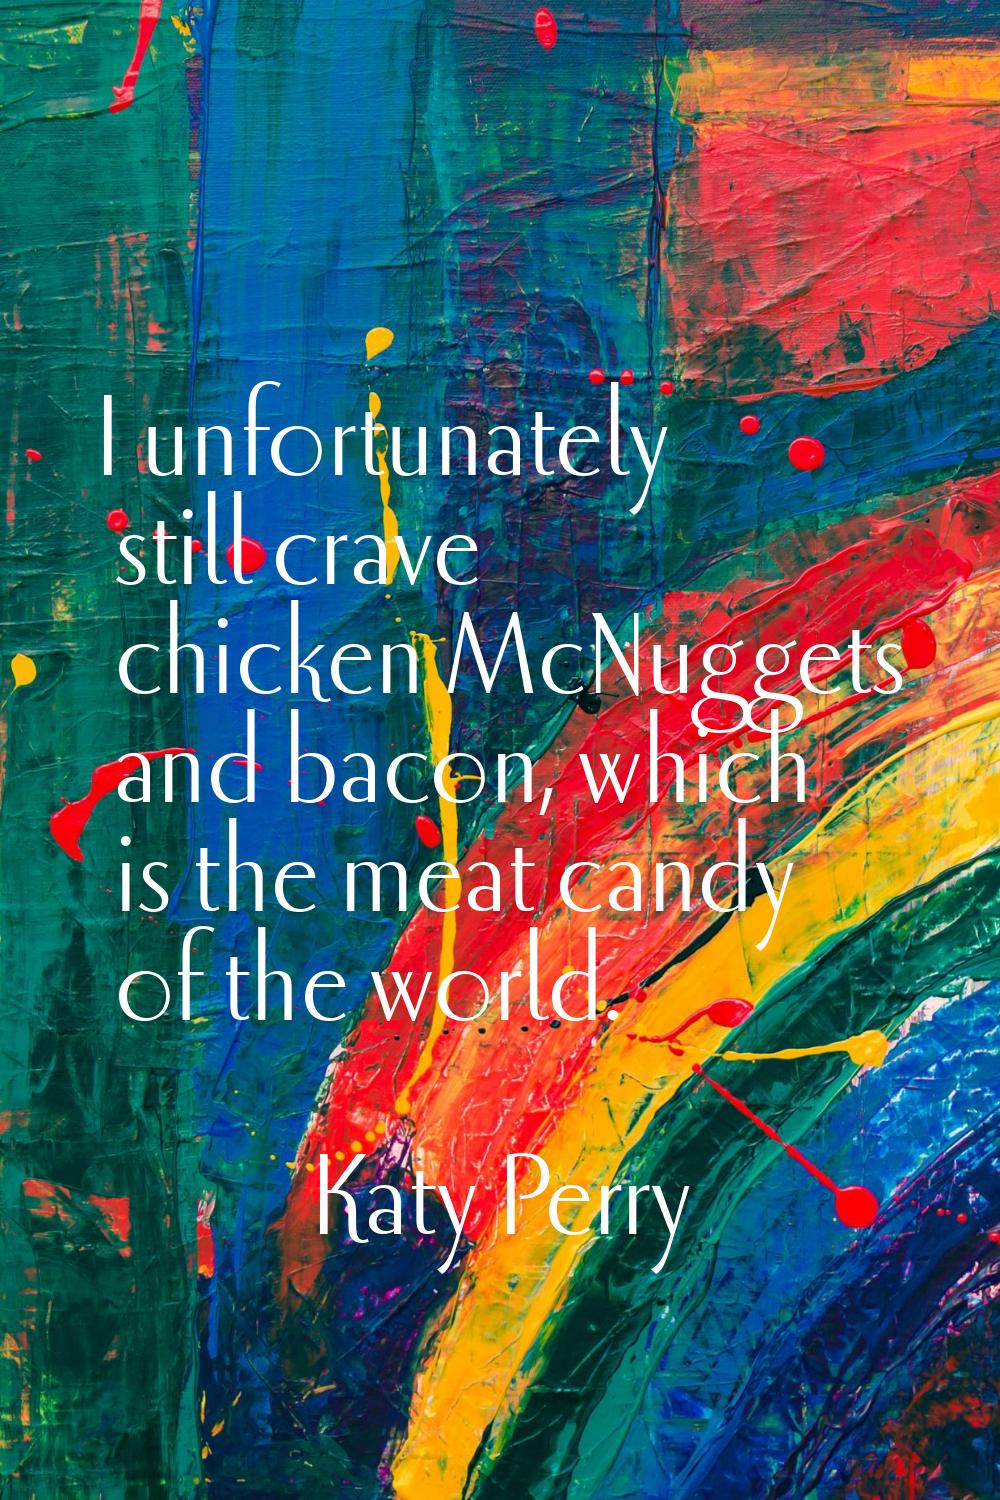 I unfortunately still crave chicken McNuggets and bacon, which is the meat candy of the world.